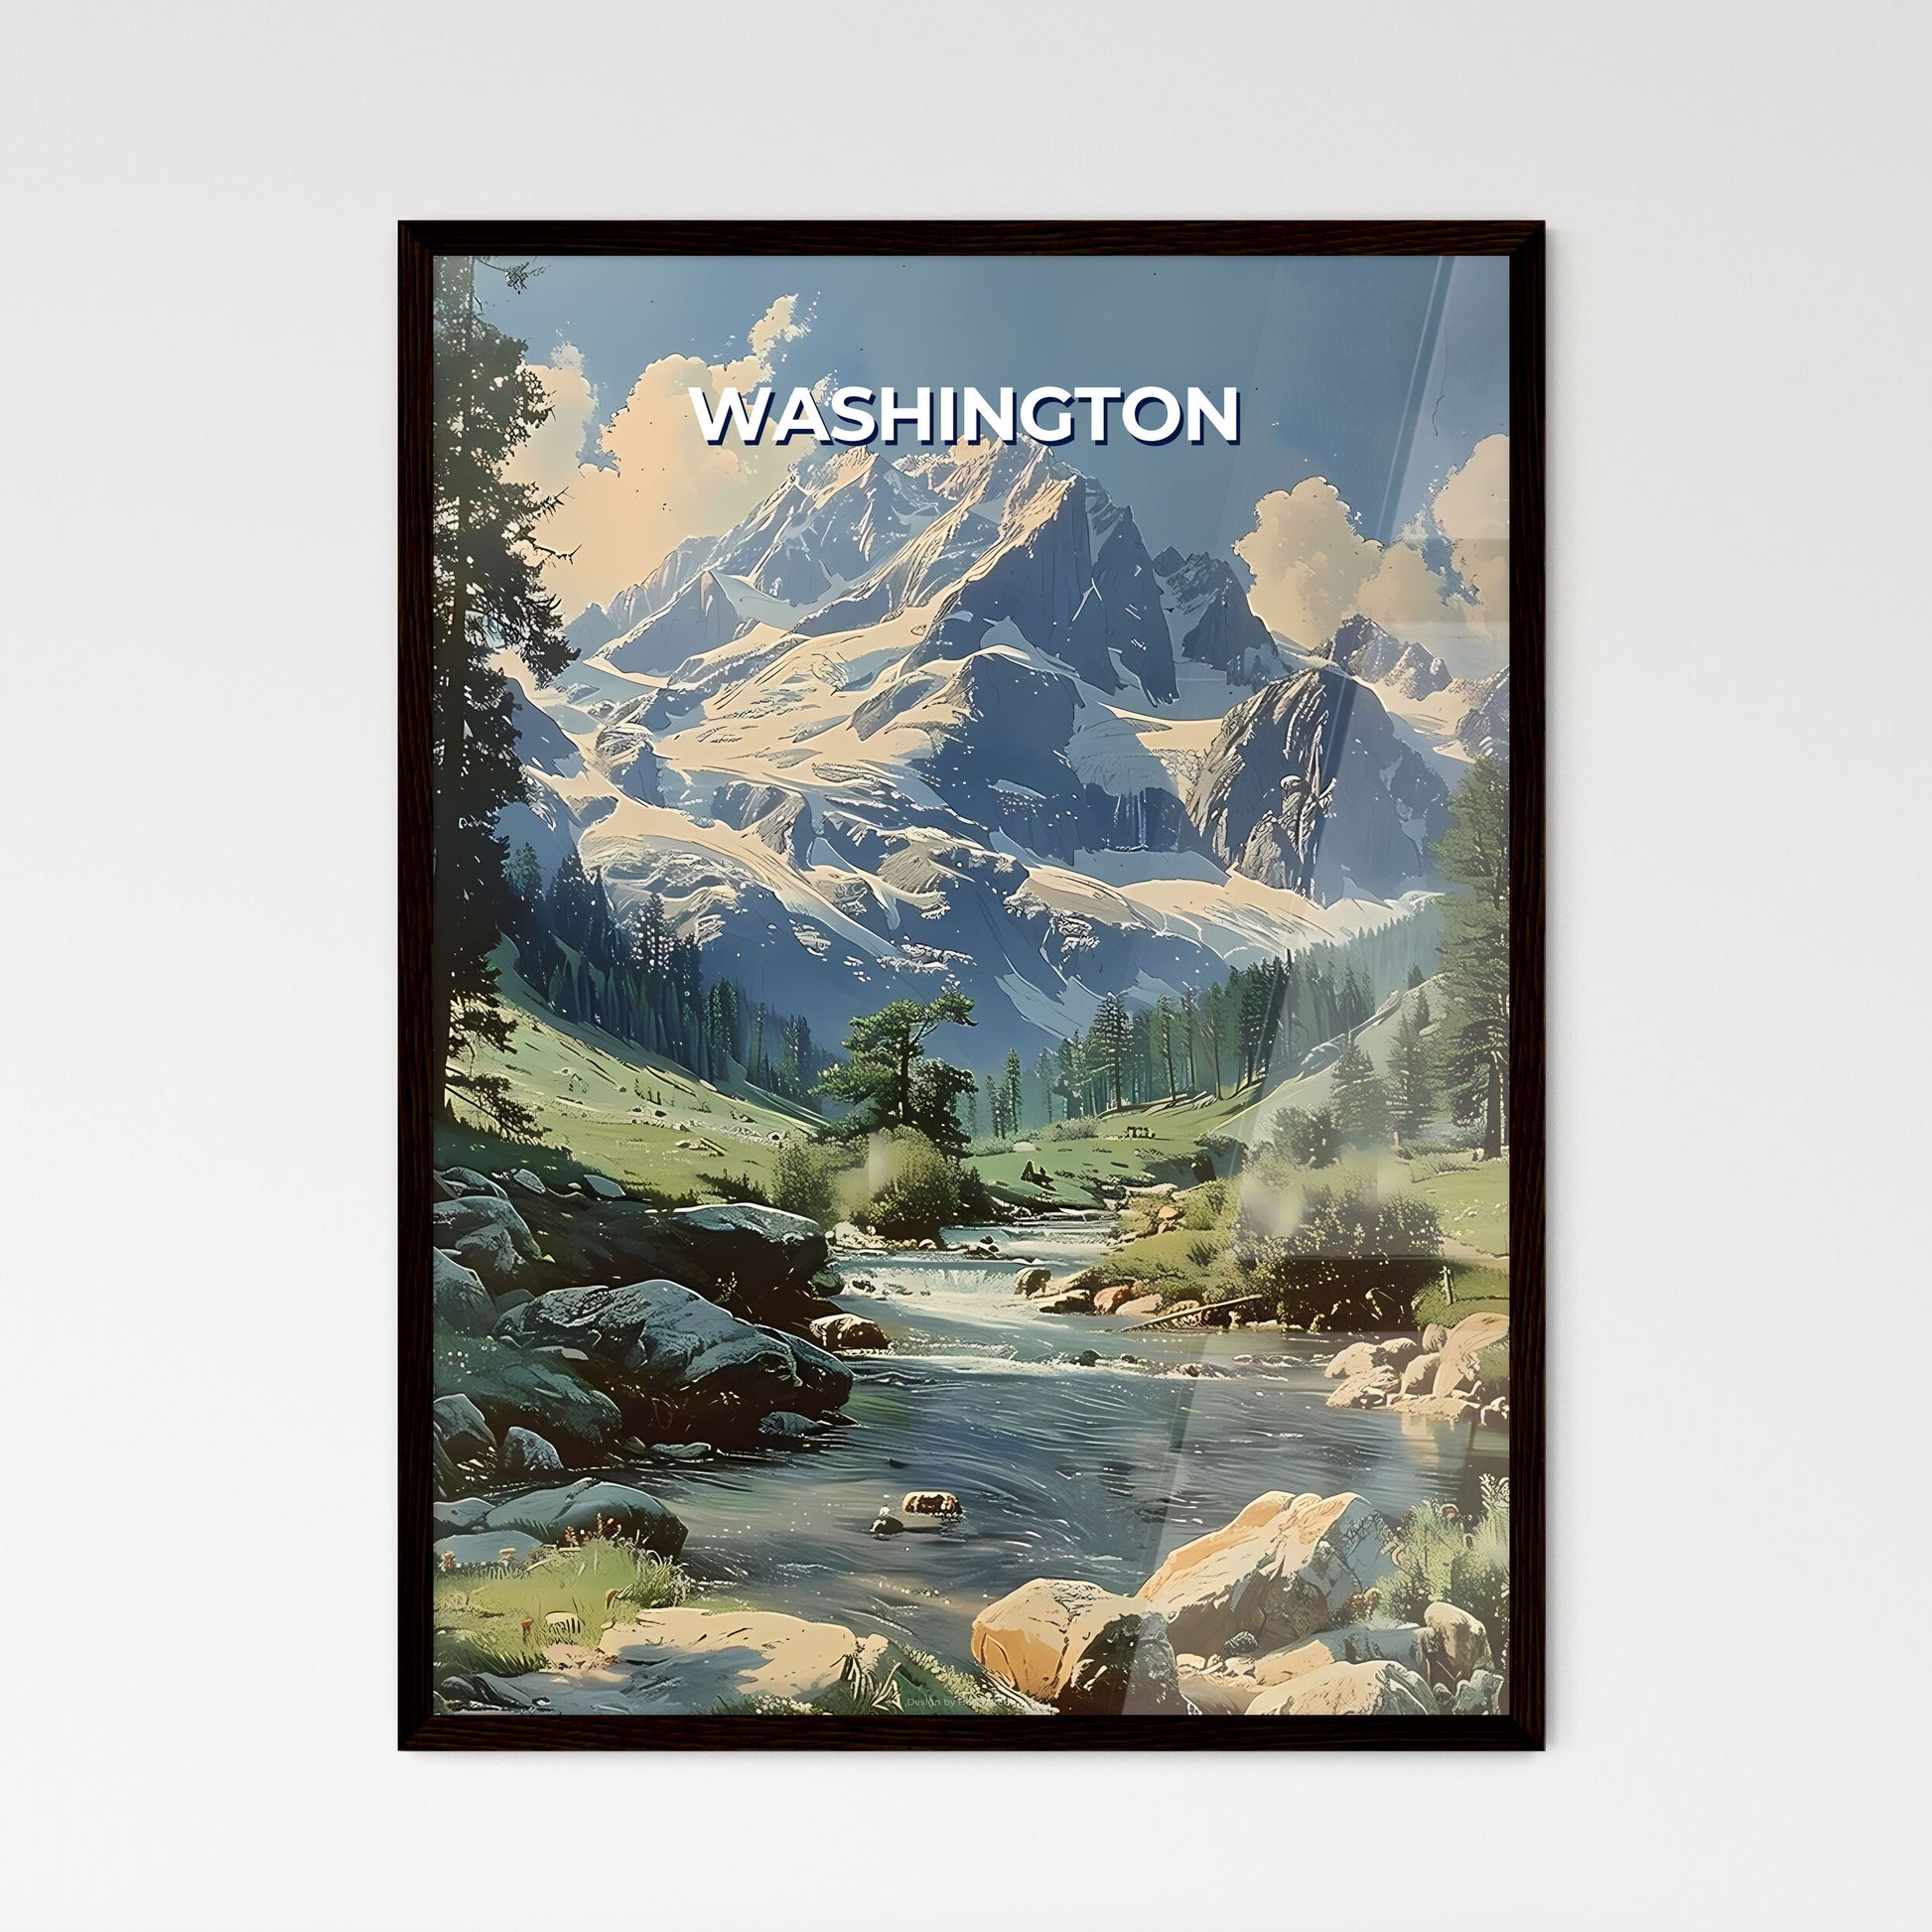 Enchanting Hand-Painted Scenic Artwork Depicting a Serene Valley with Winding River, Majestic Mountains, and Verdant Trees